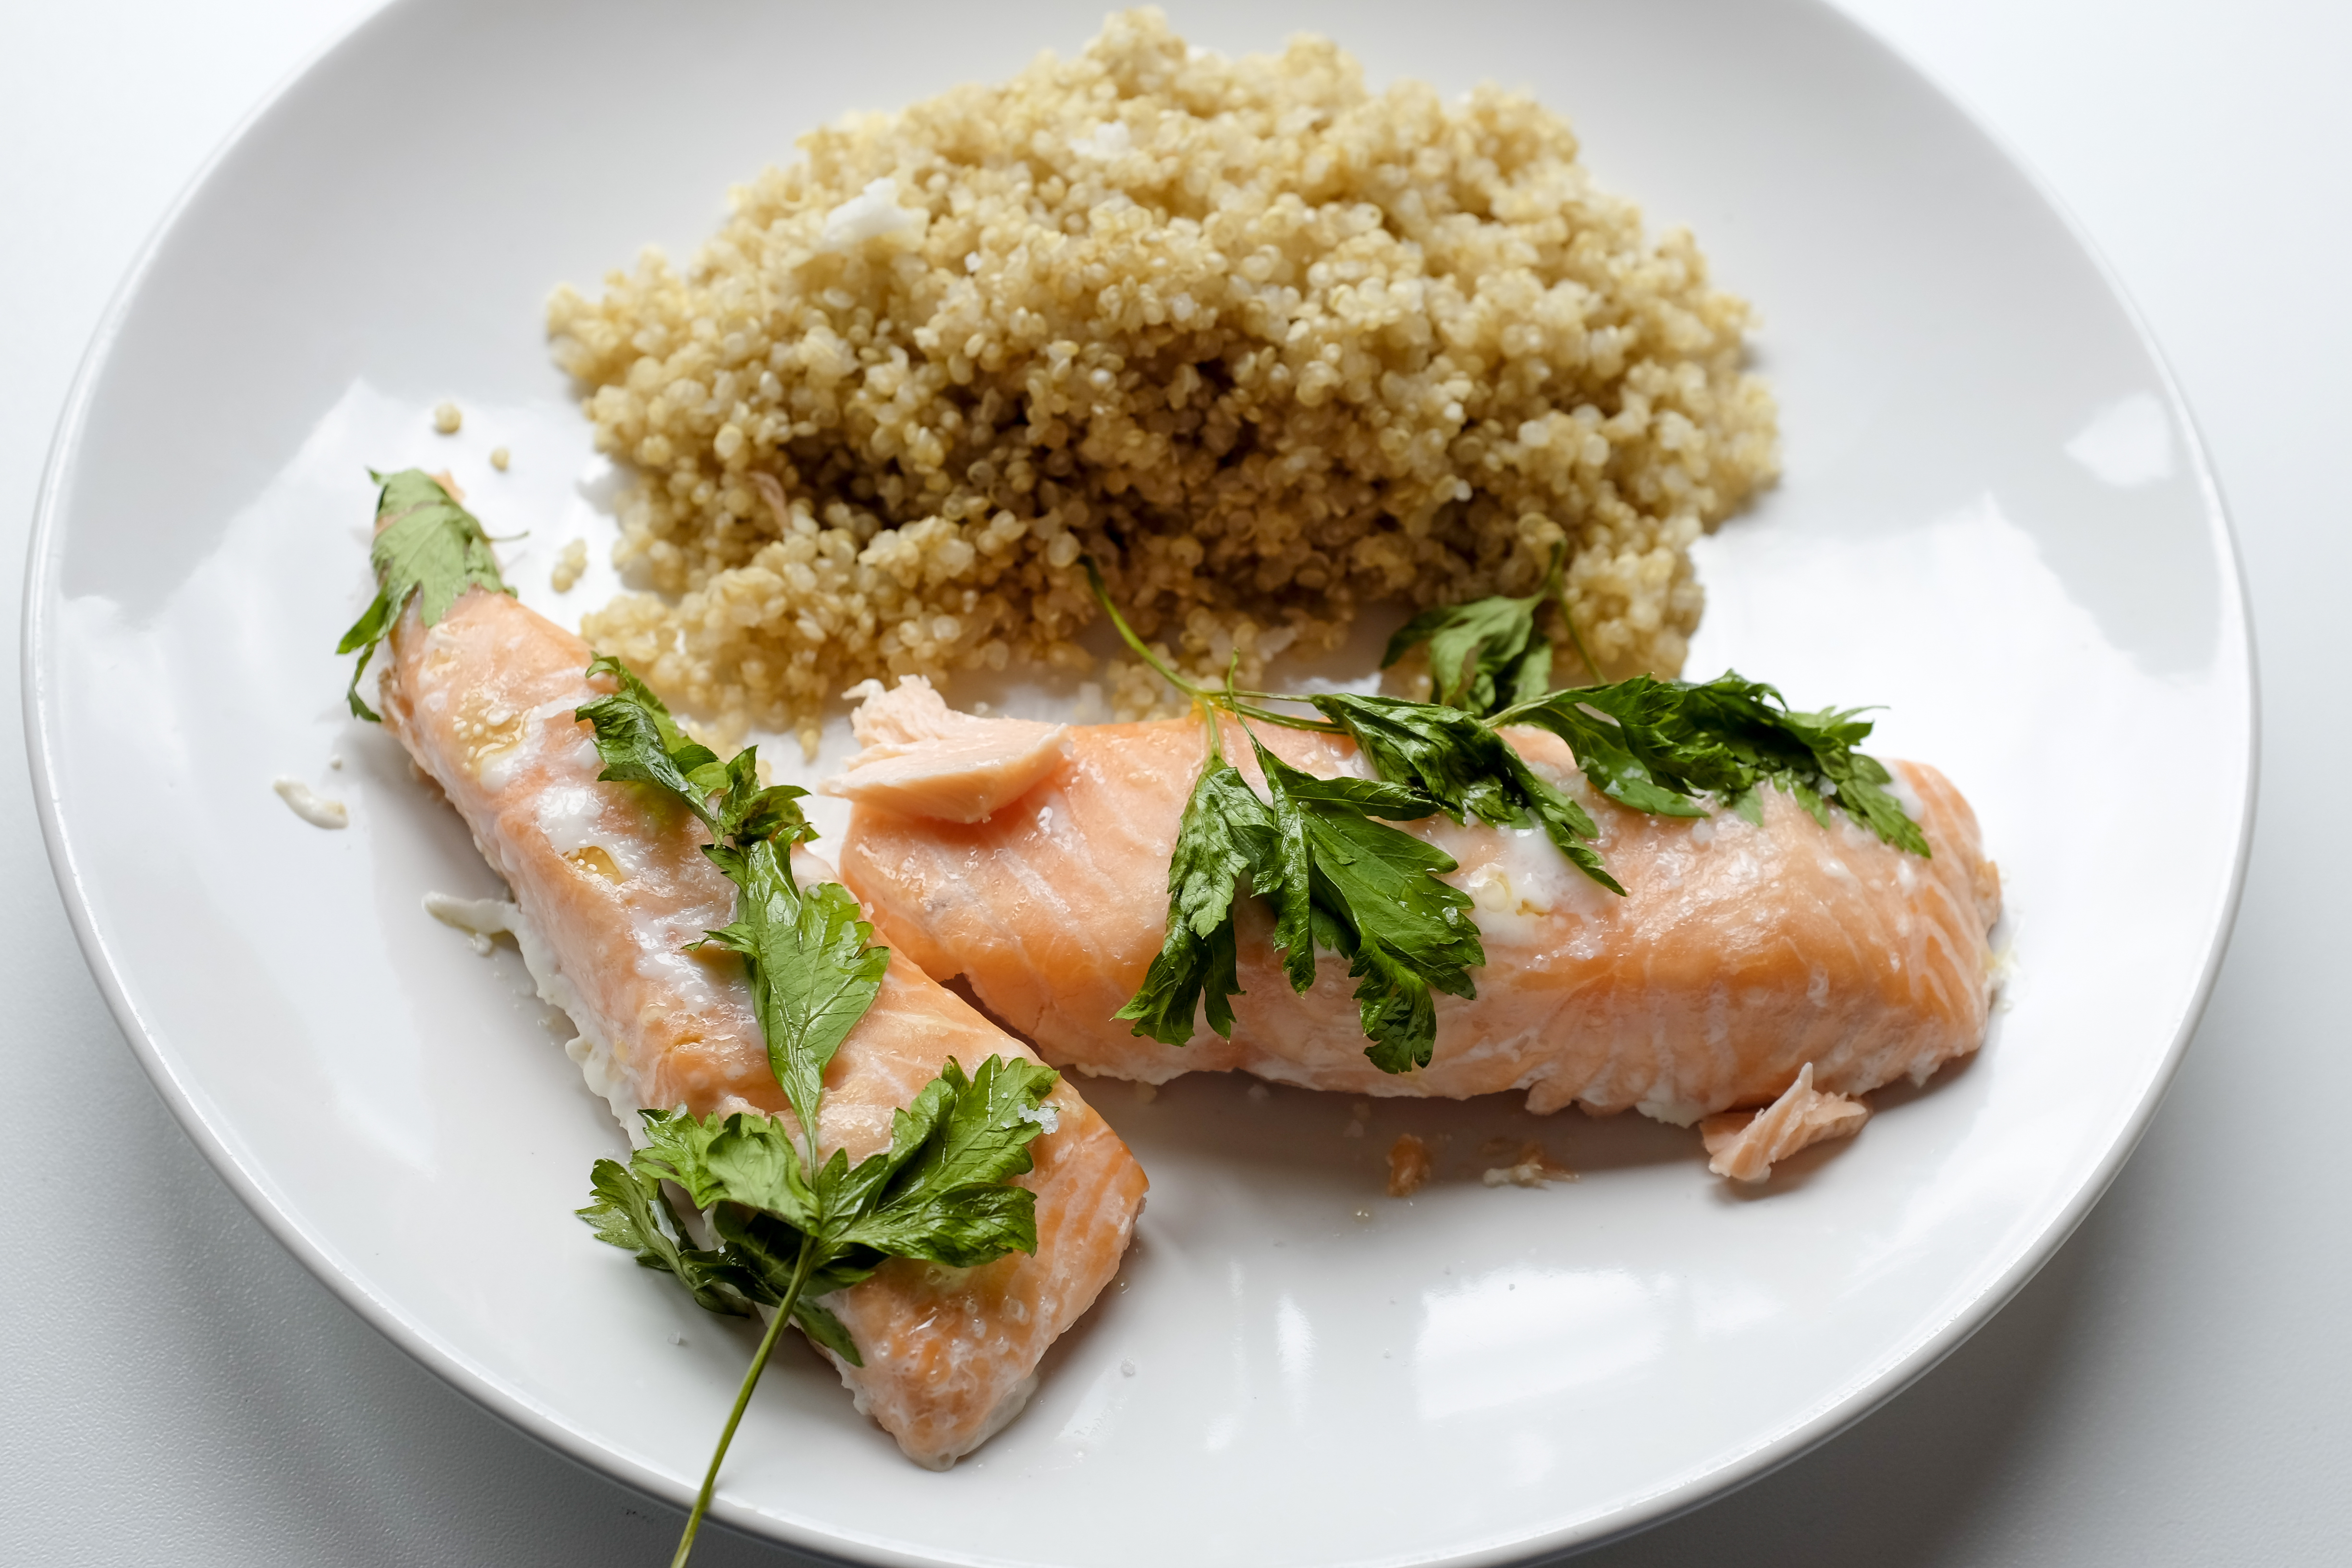 Plate of salmon with quinoa